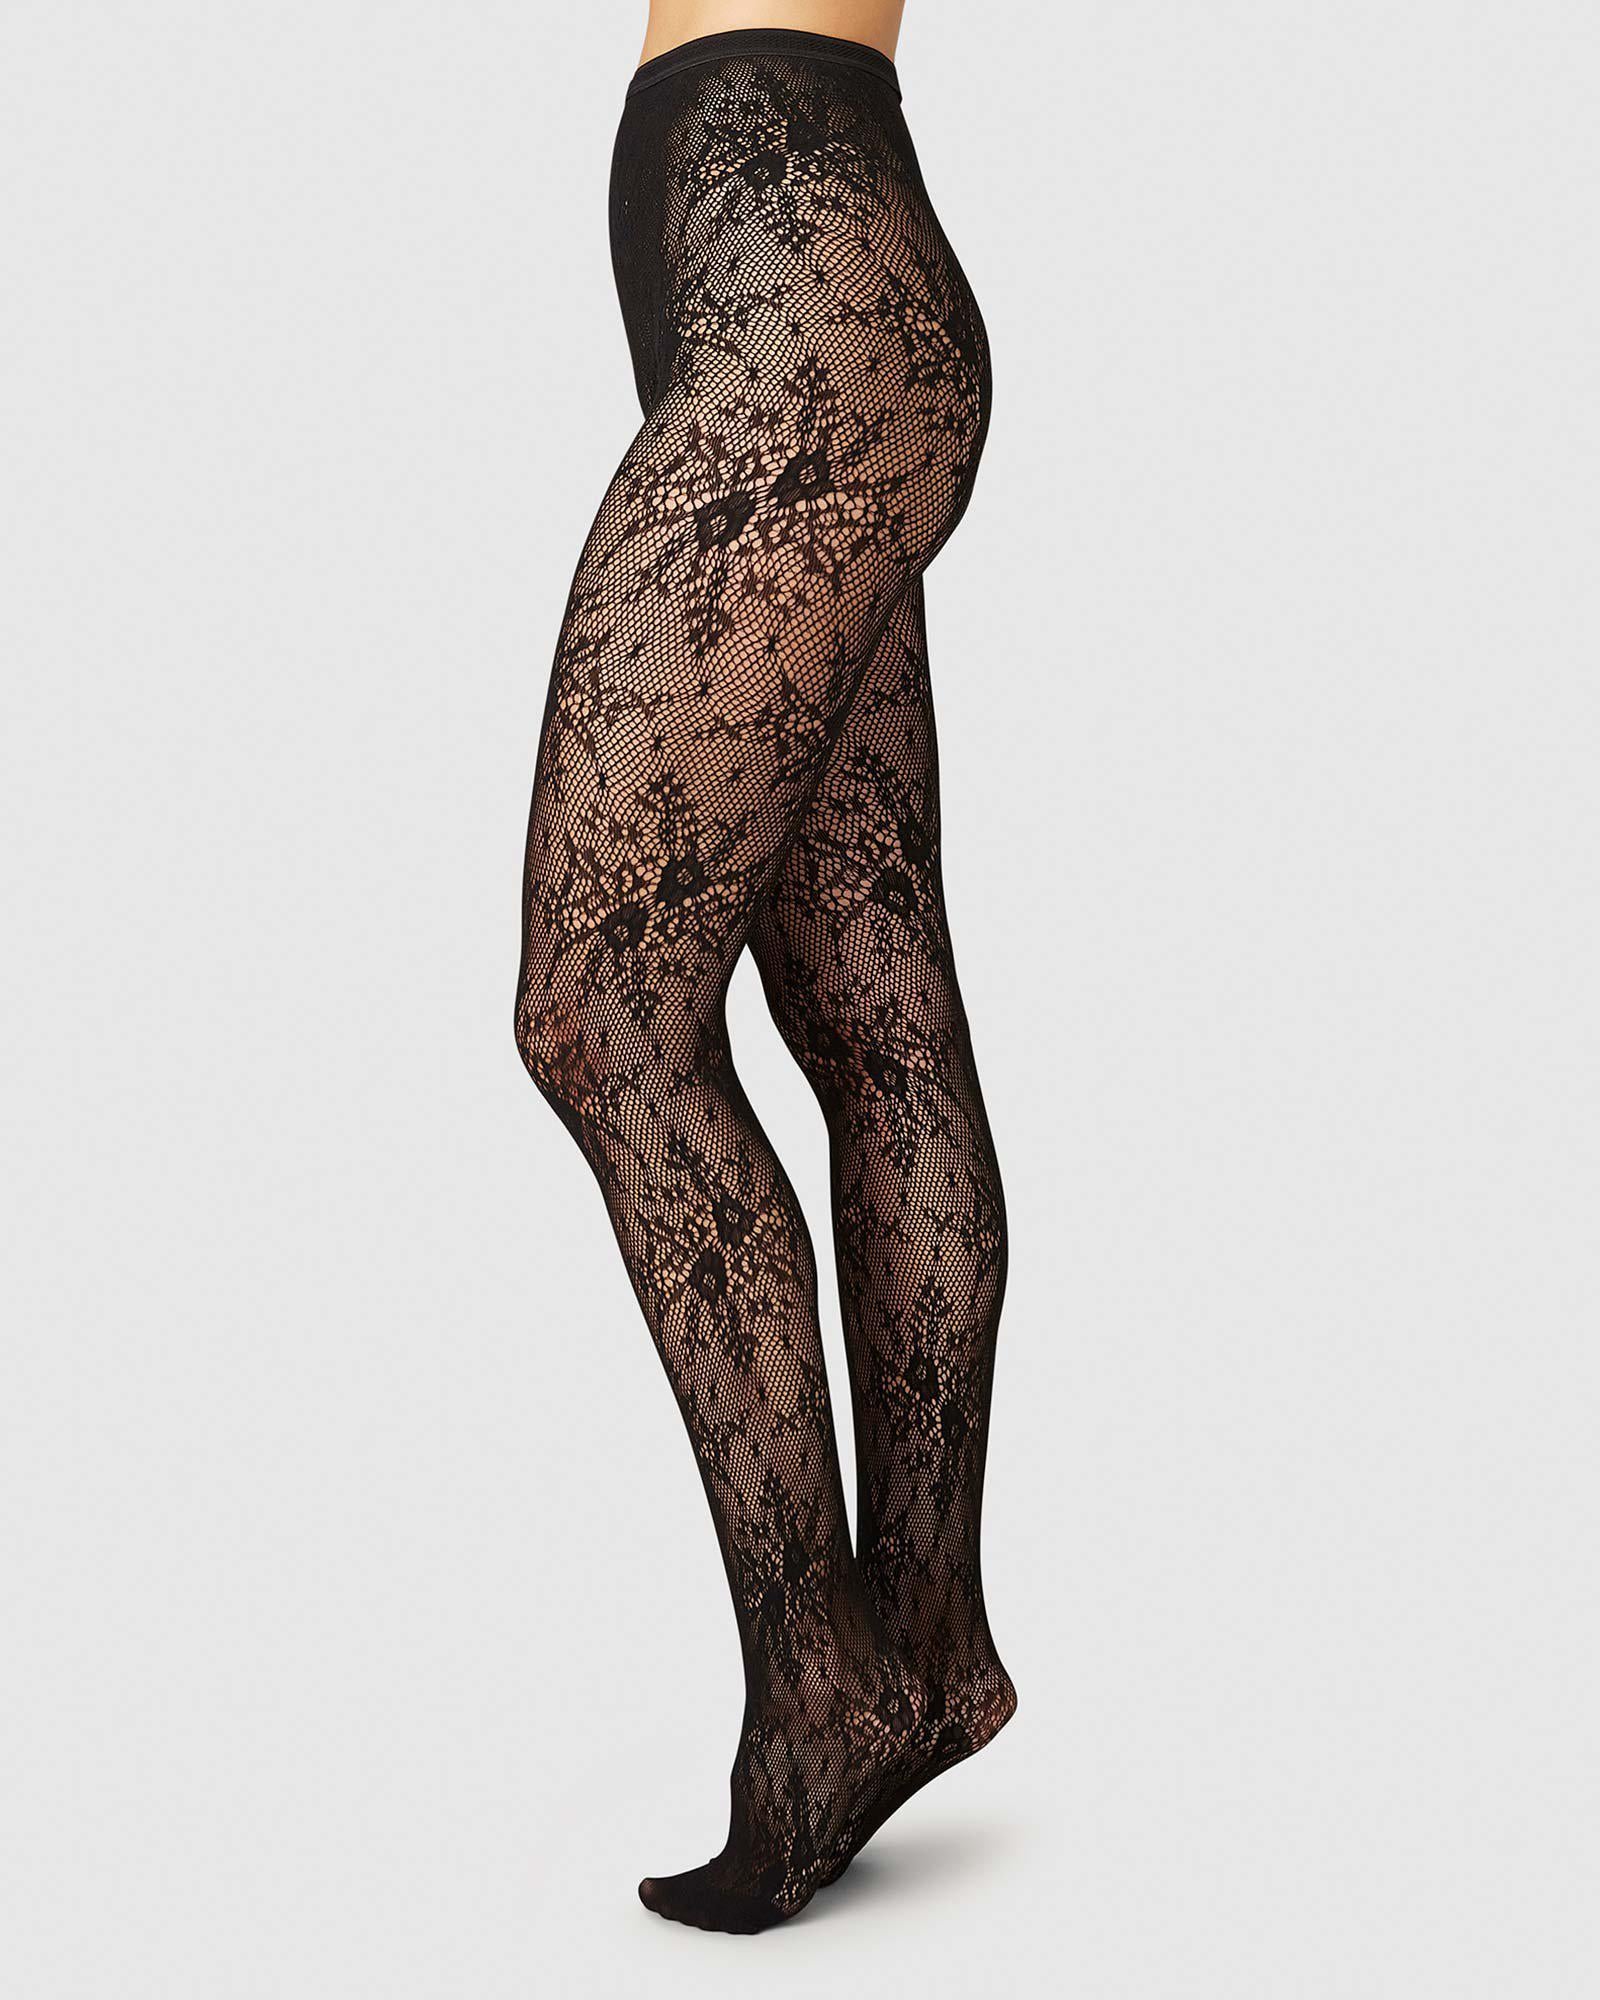 Black Floral Lace Womens Stockings